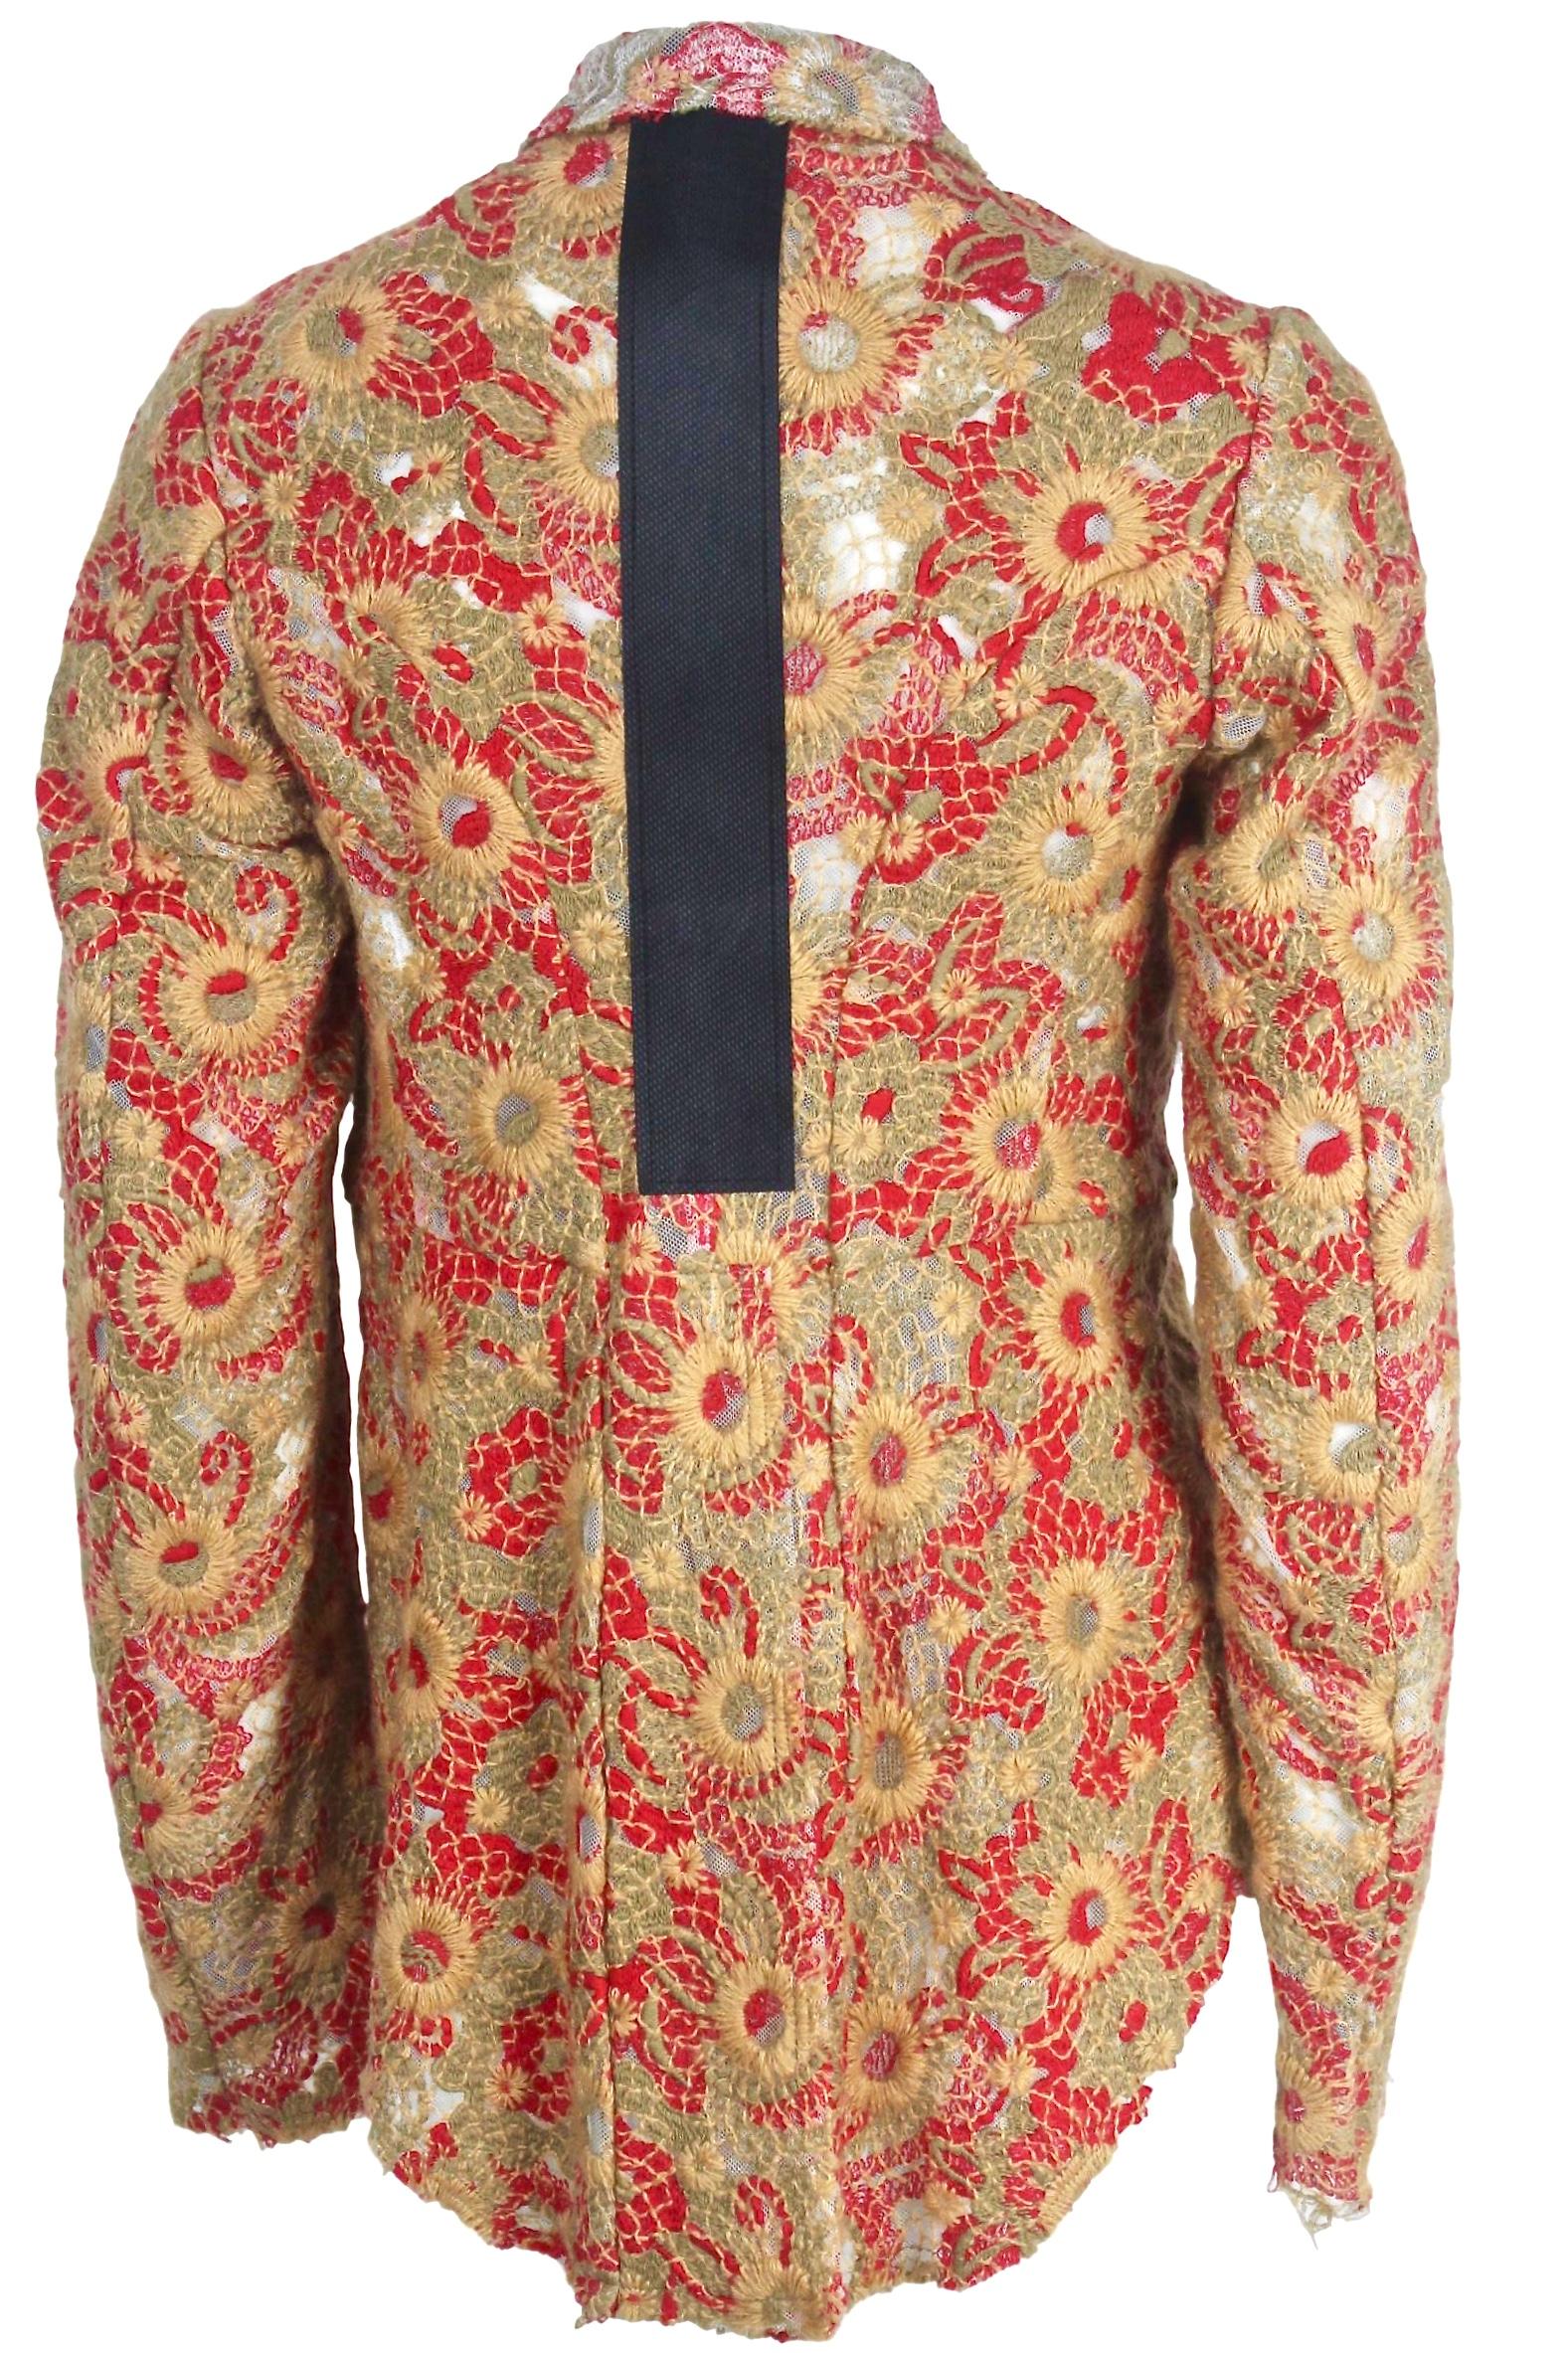 Women's Comme des Garcons Wool Embroidered Lace Jacket 2003 Collection For Sale